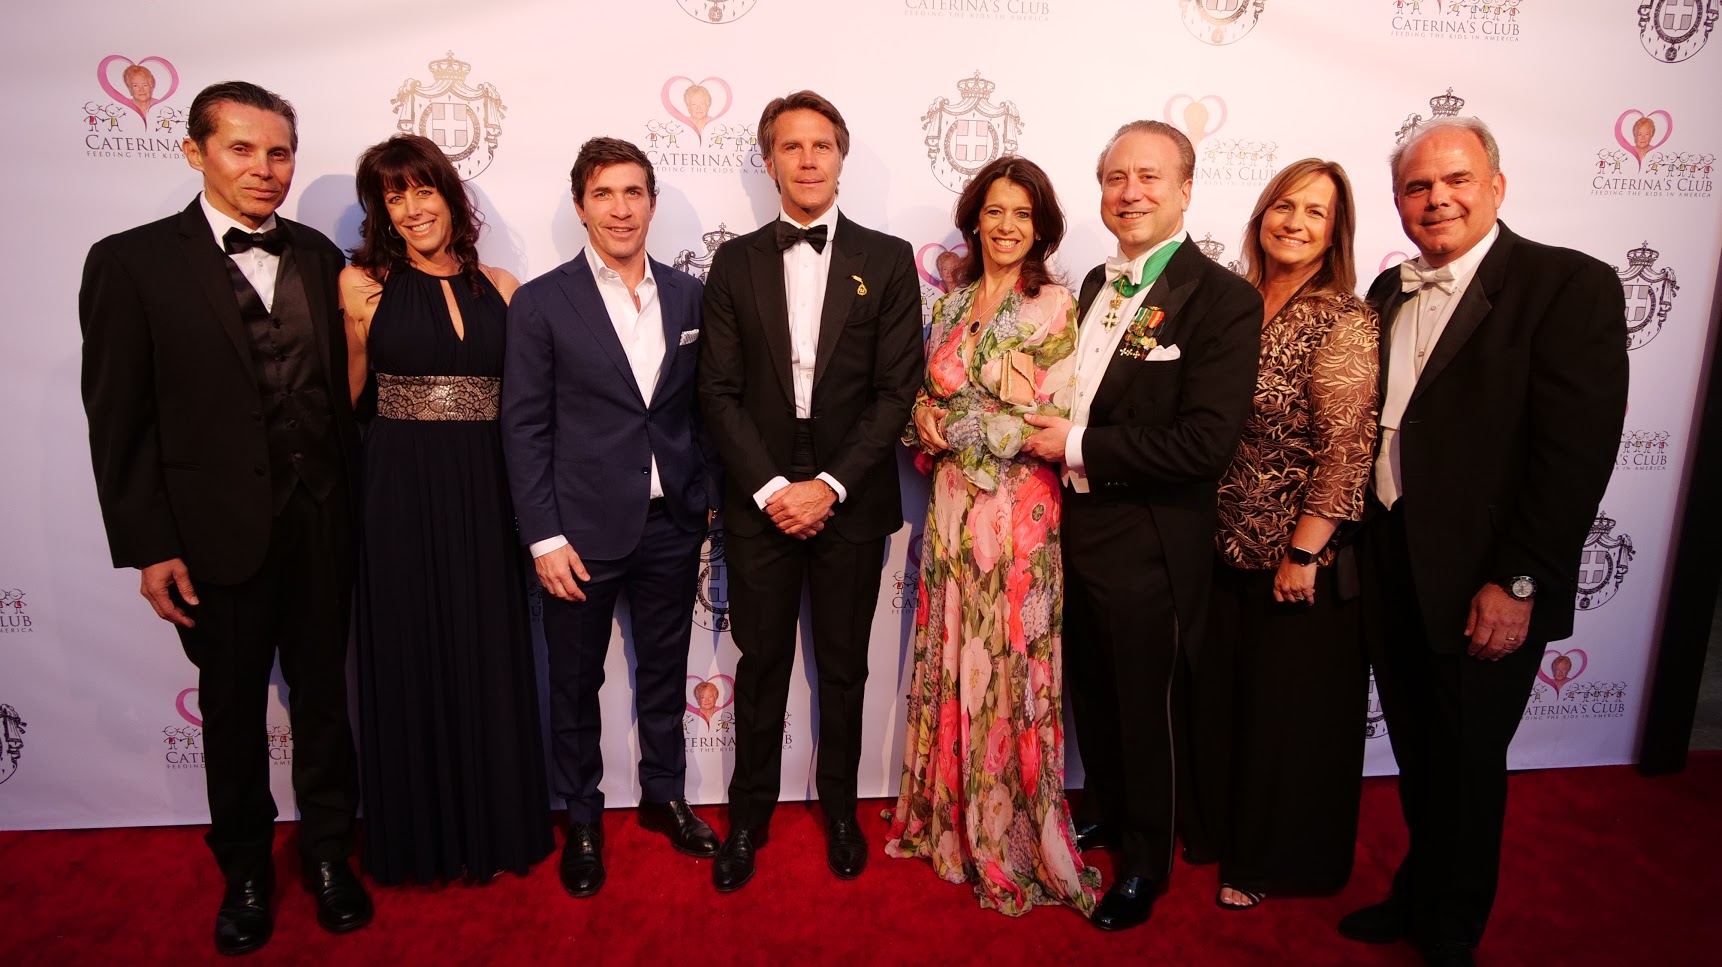 Grand Patron and Savoy Foundation Board Member Anthony Viscogliosi (third from right) with HRH Prince Emanuele Filiberto of Savoy and guests.